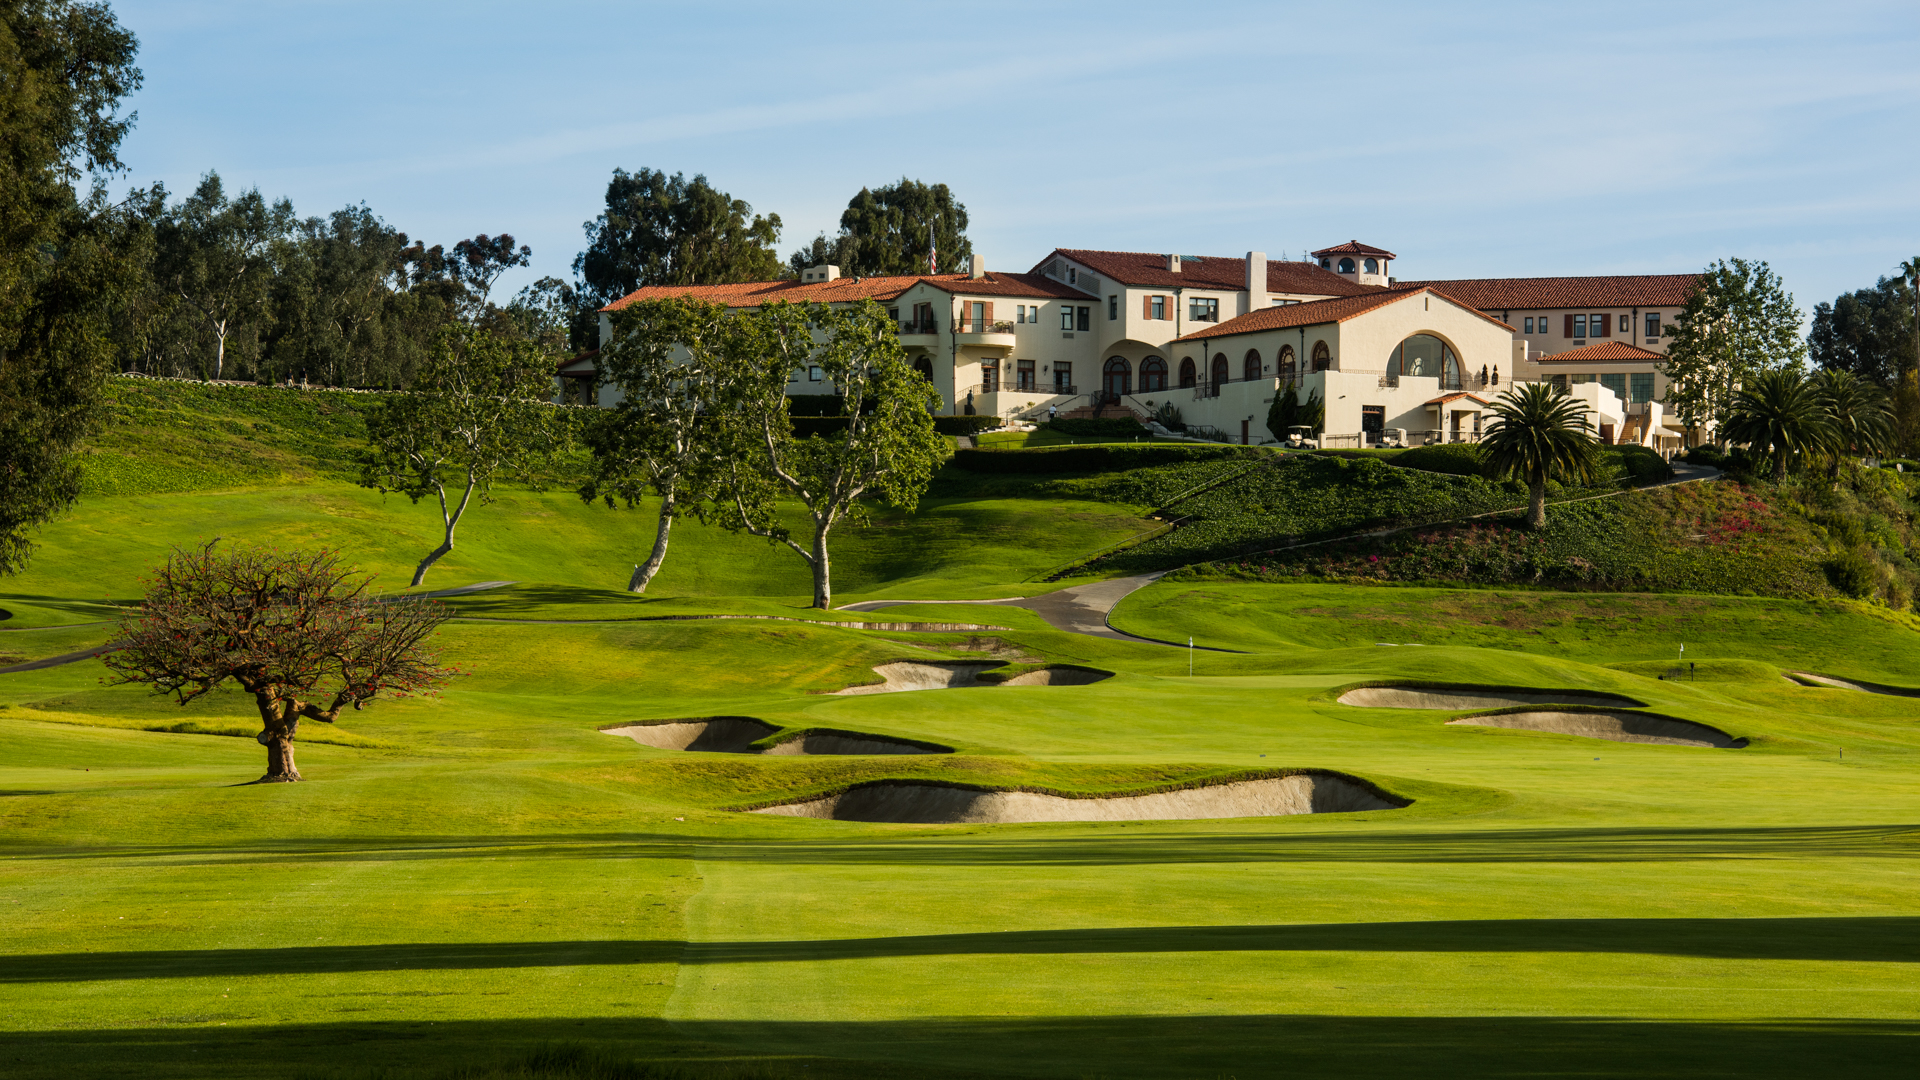 The famous Riviera Country Club will host the men’s and women’s golf competitions at the 2028 Olympic Games in Los Angeles | LPGA